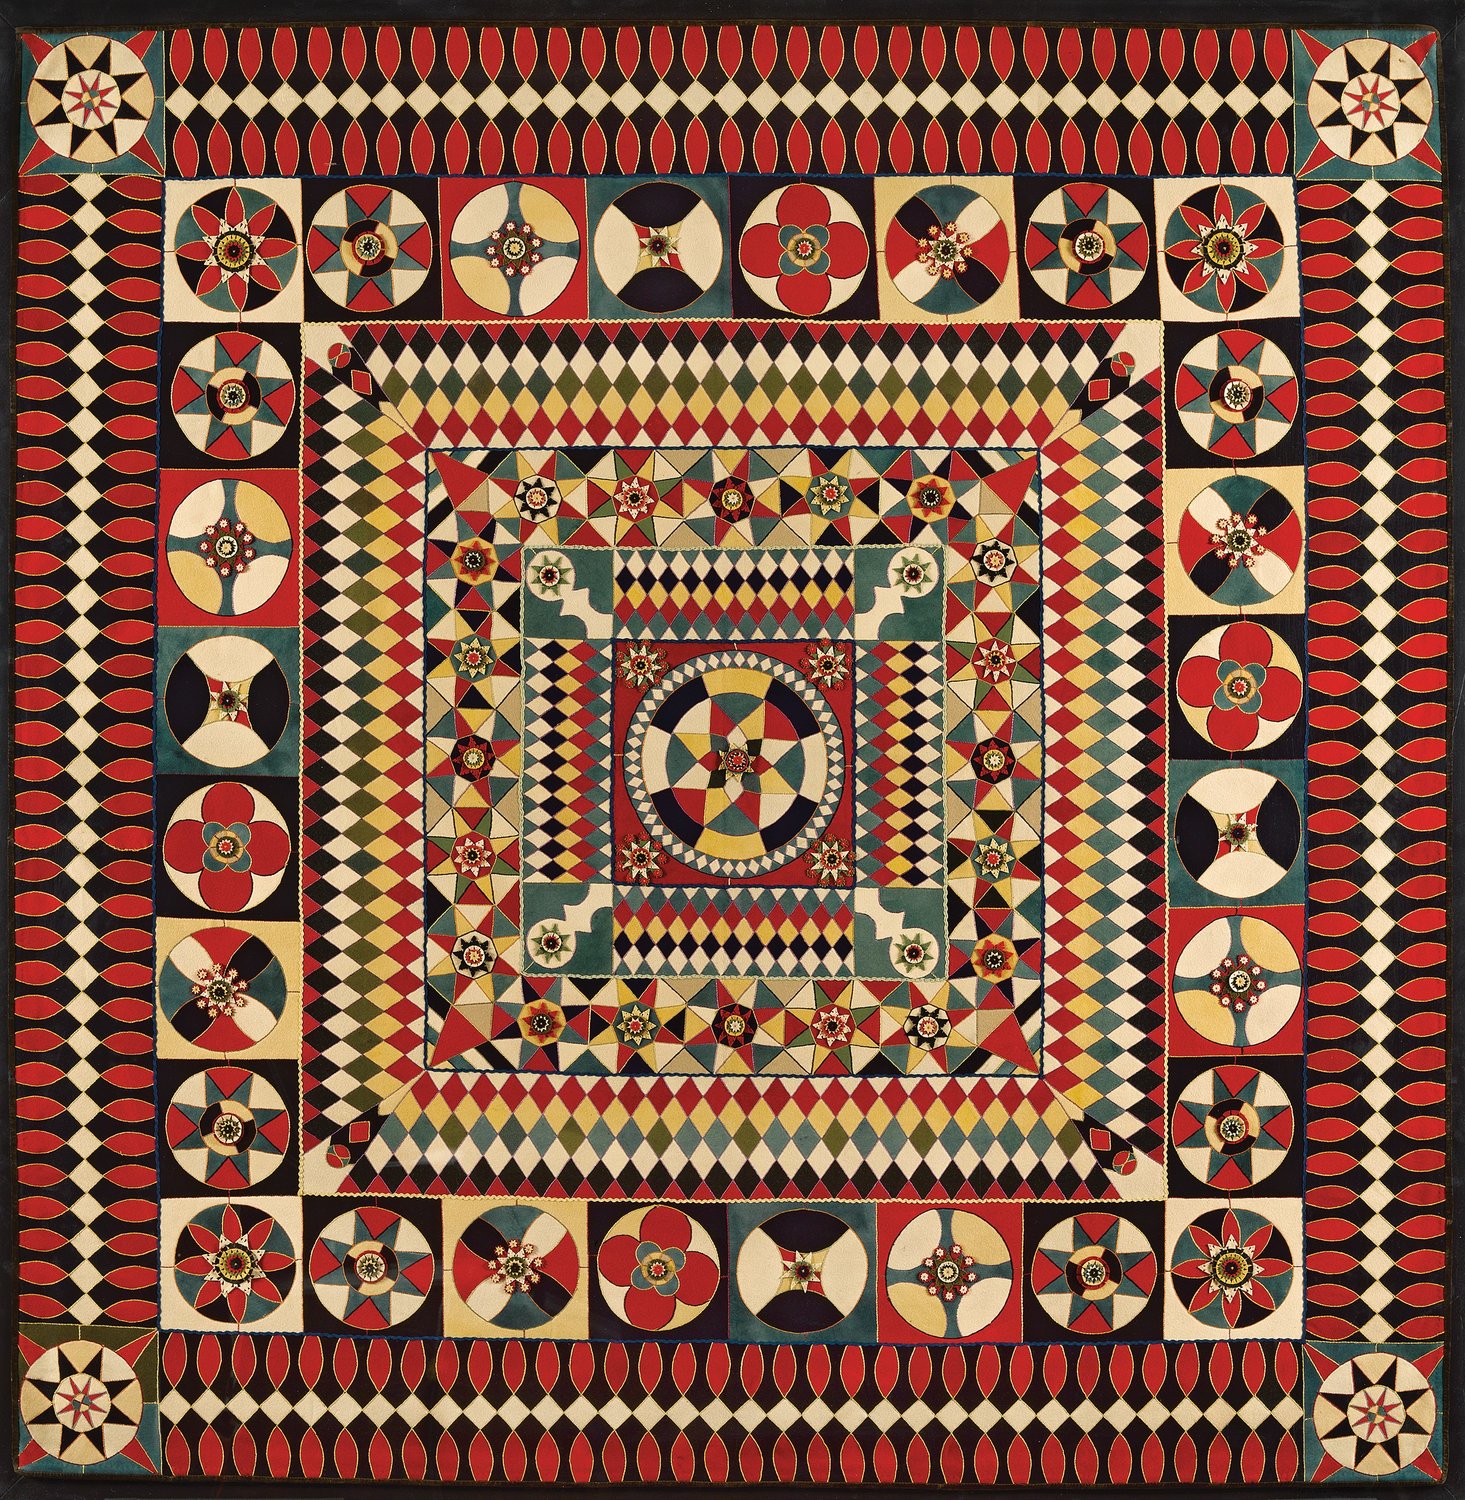 The artist of this wool soldier’s quilt is unknown. The quilt was created in 1850-75 in India and is probably from military uniforms with embroidery thread, rickrack and velvet binding. It is hand-embroidered and has an inlaid, layered-applique.